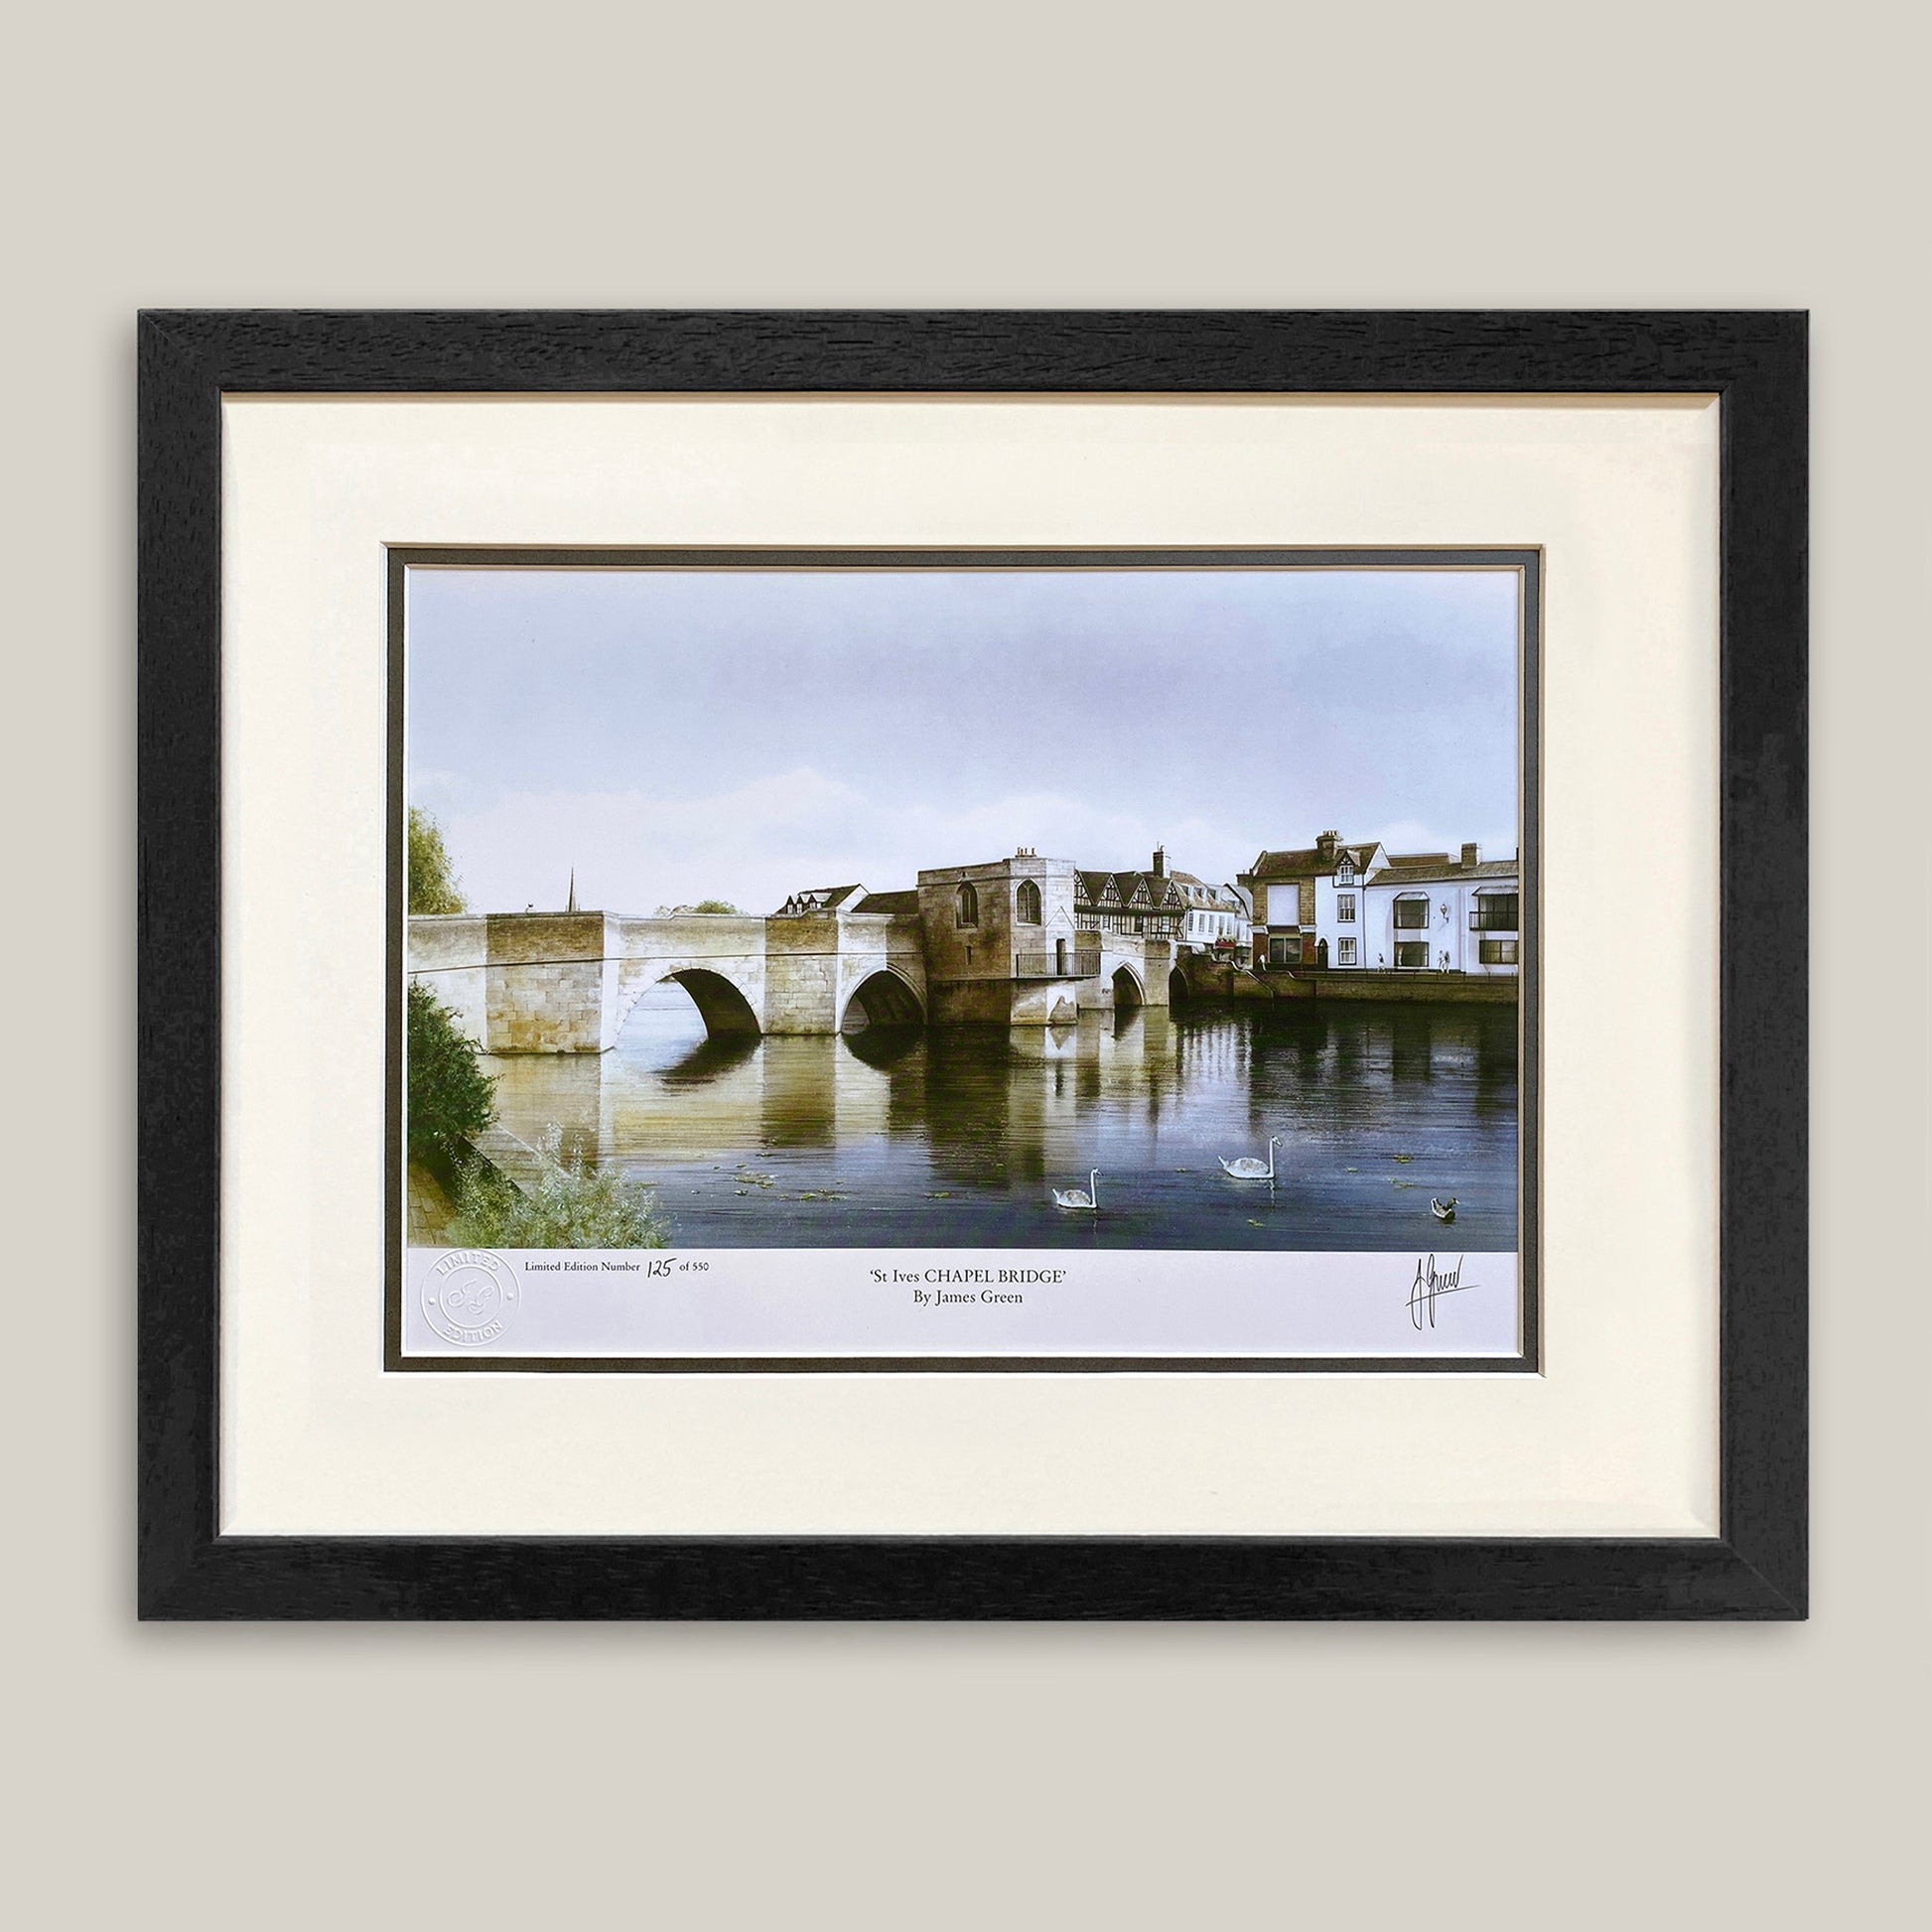 St Ives Chapel Bridge framed painting by James Green